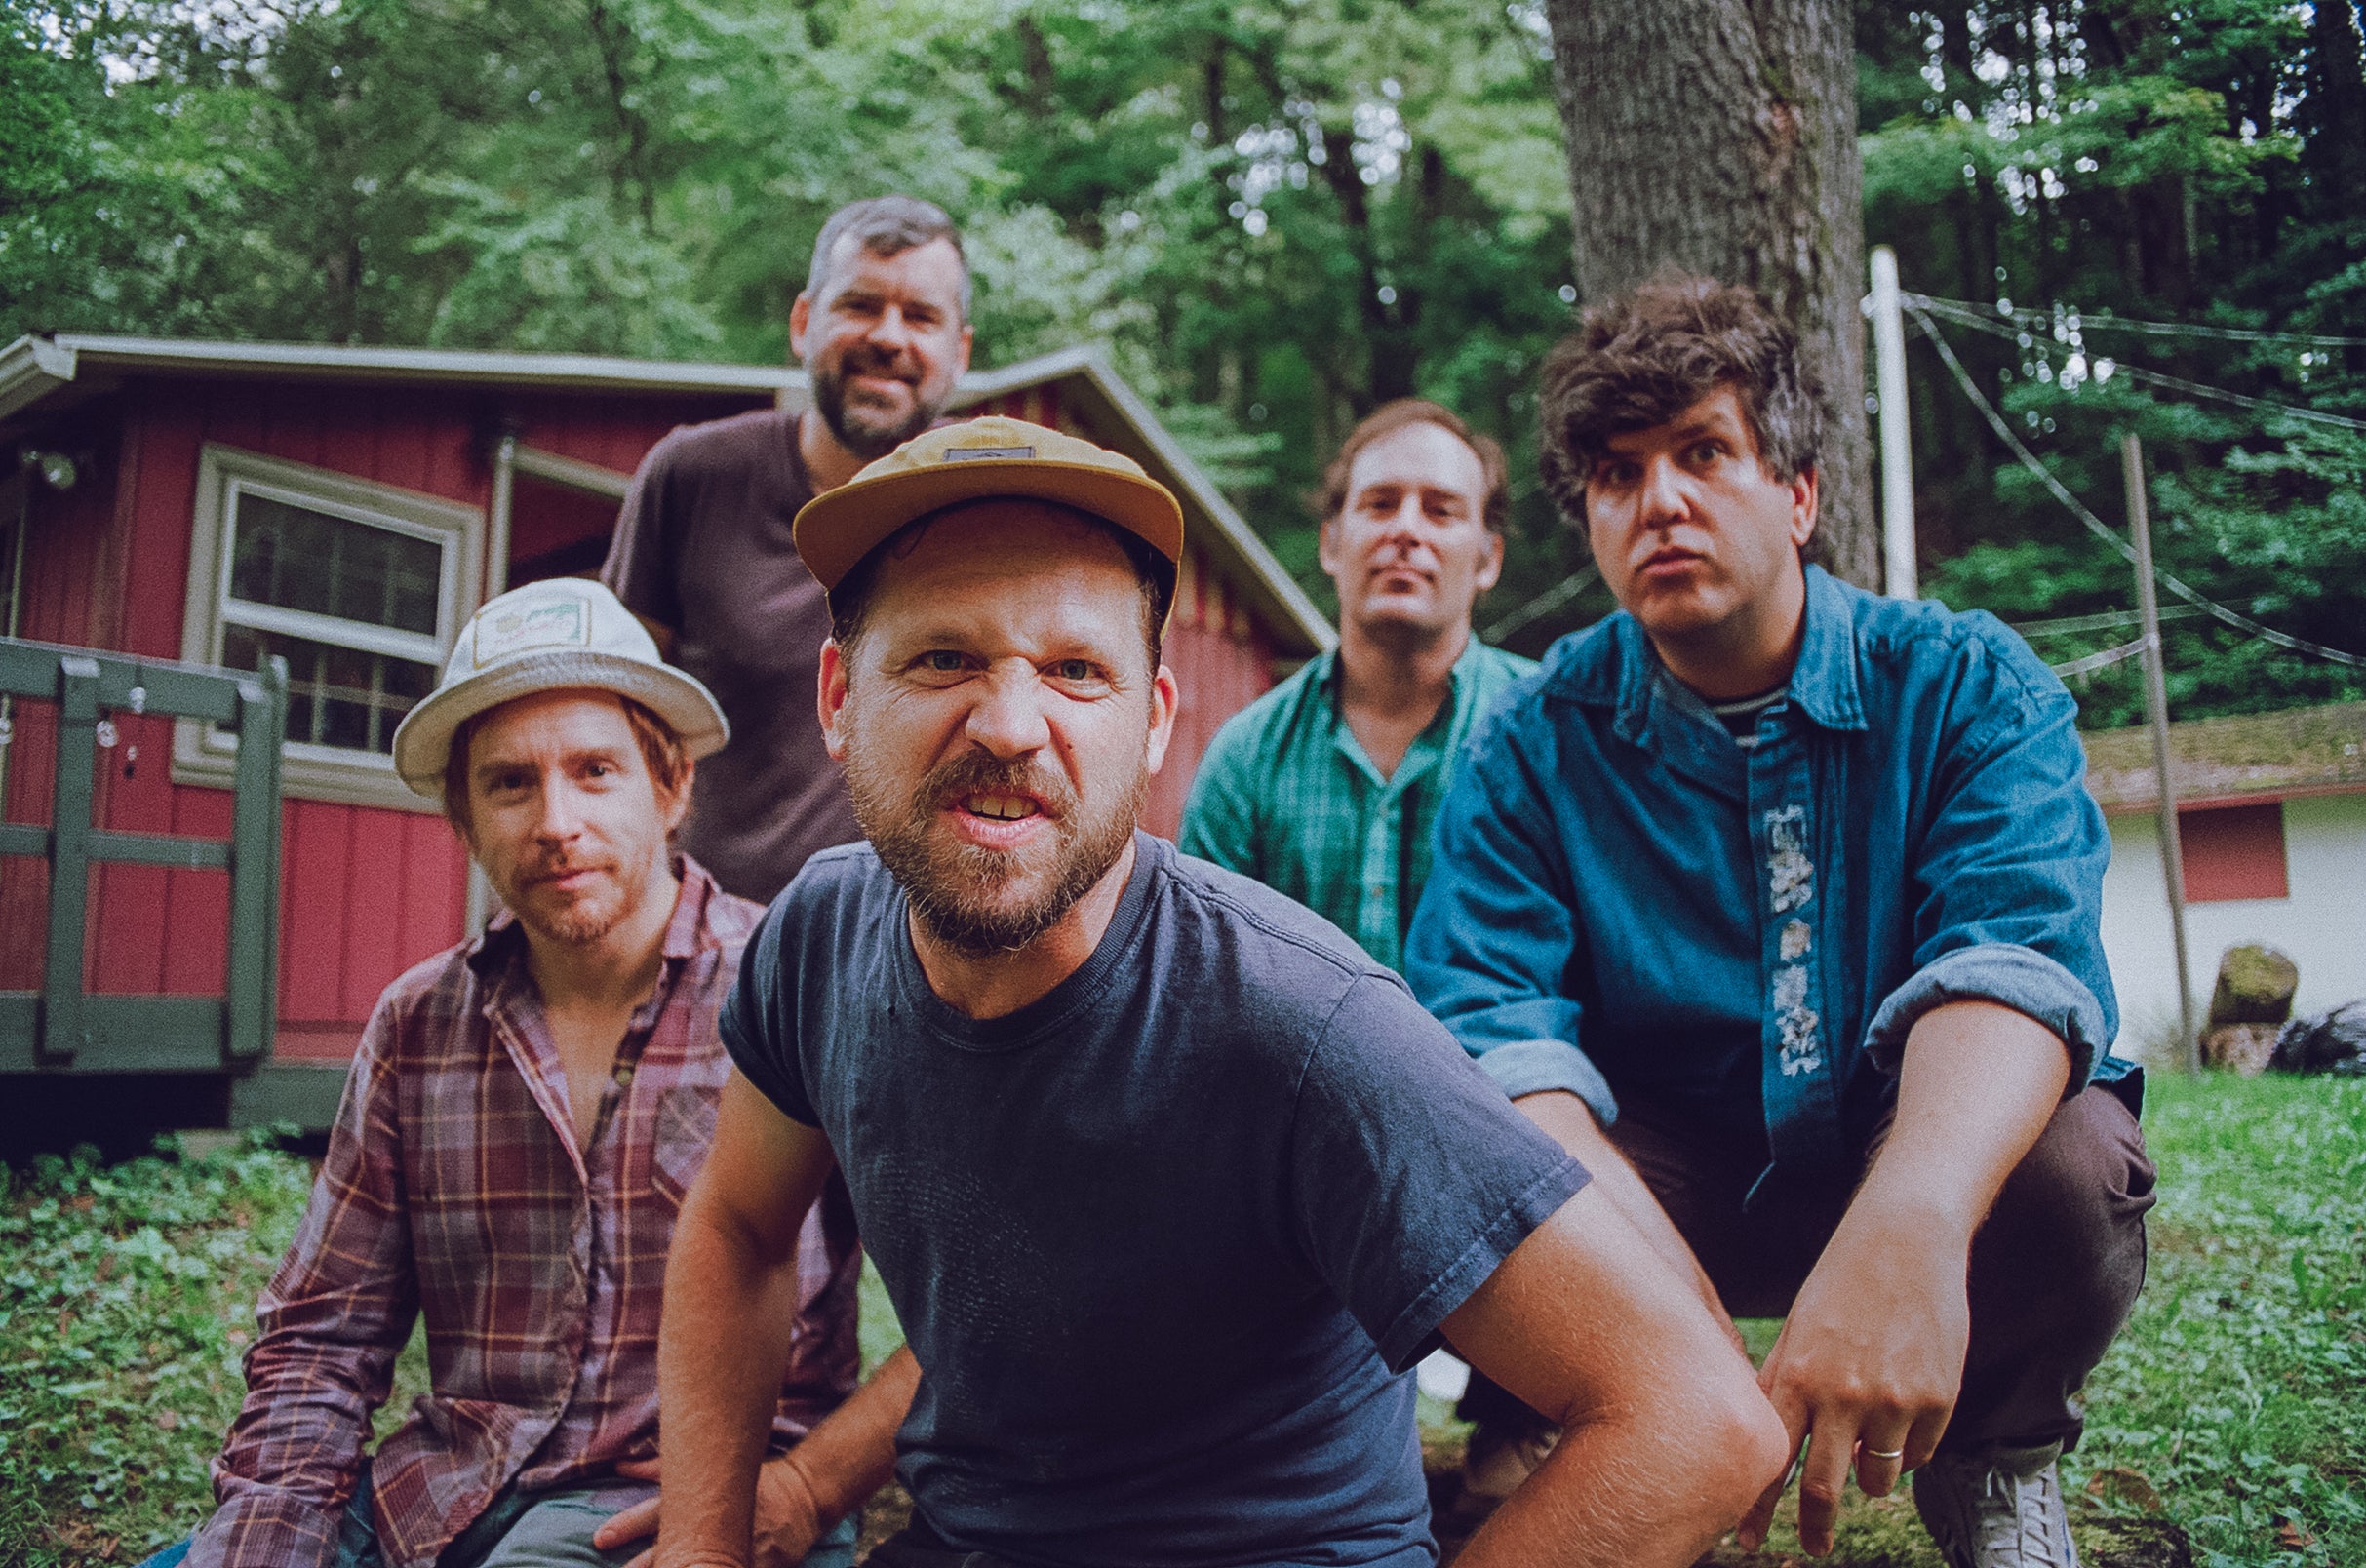 Wxpn Welcomes Dr. Dog presale password